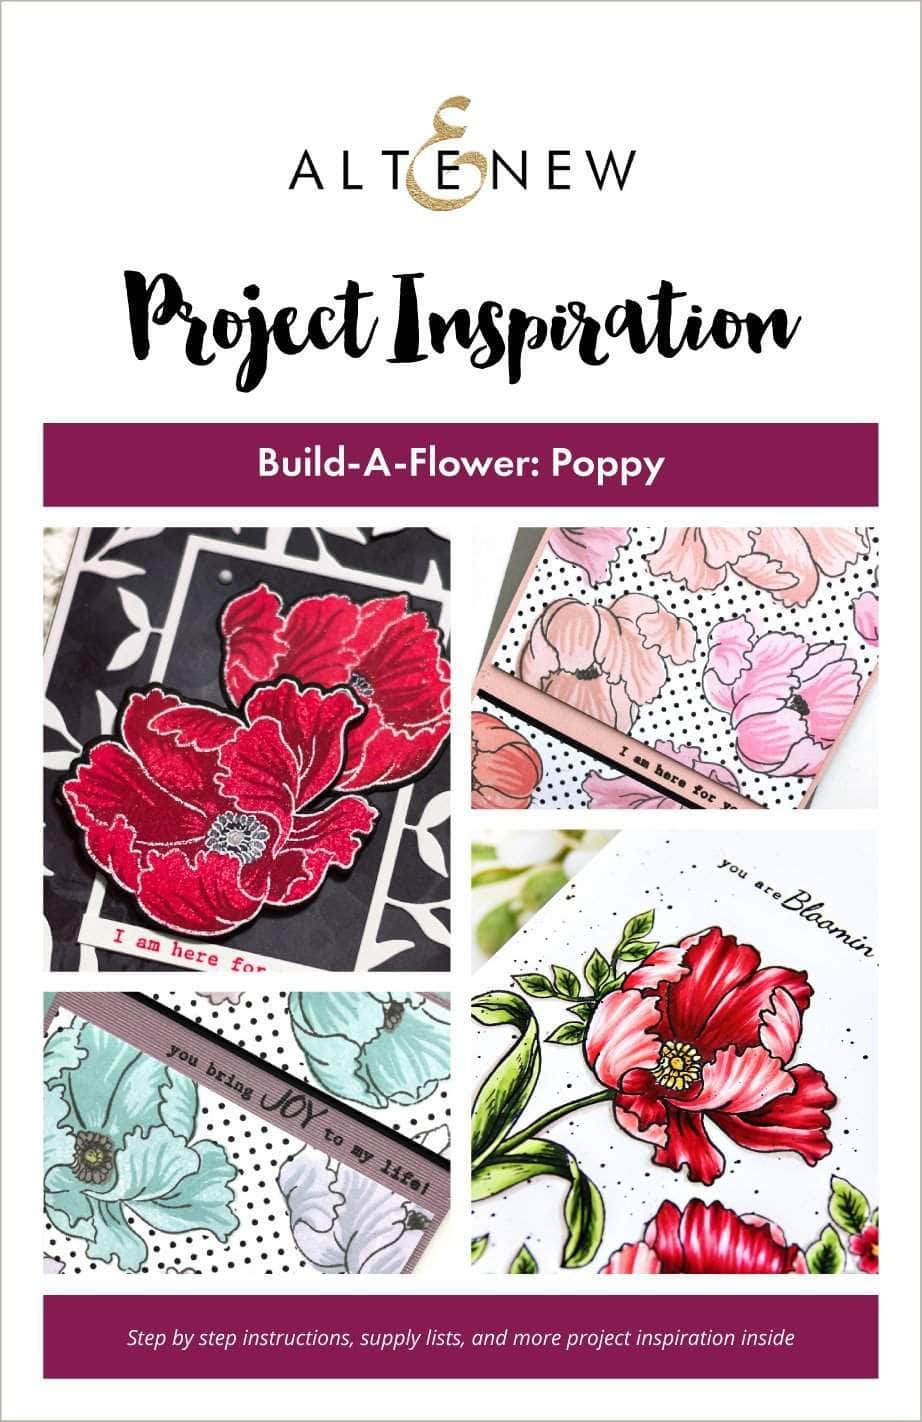 Printed Media Build-A-Flower: Poppy Project Inspiration Guide